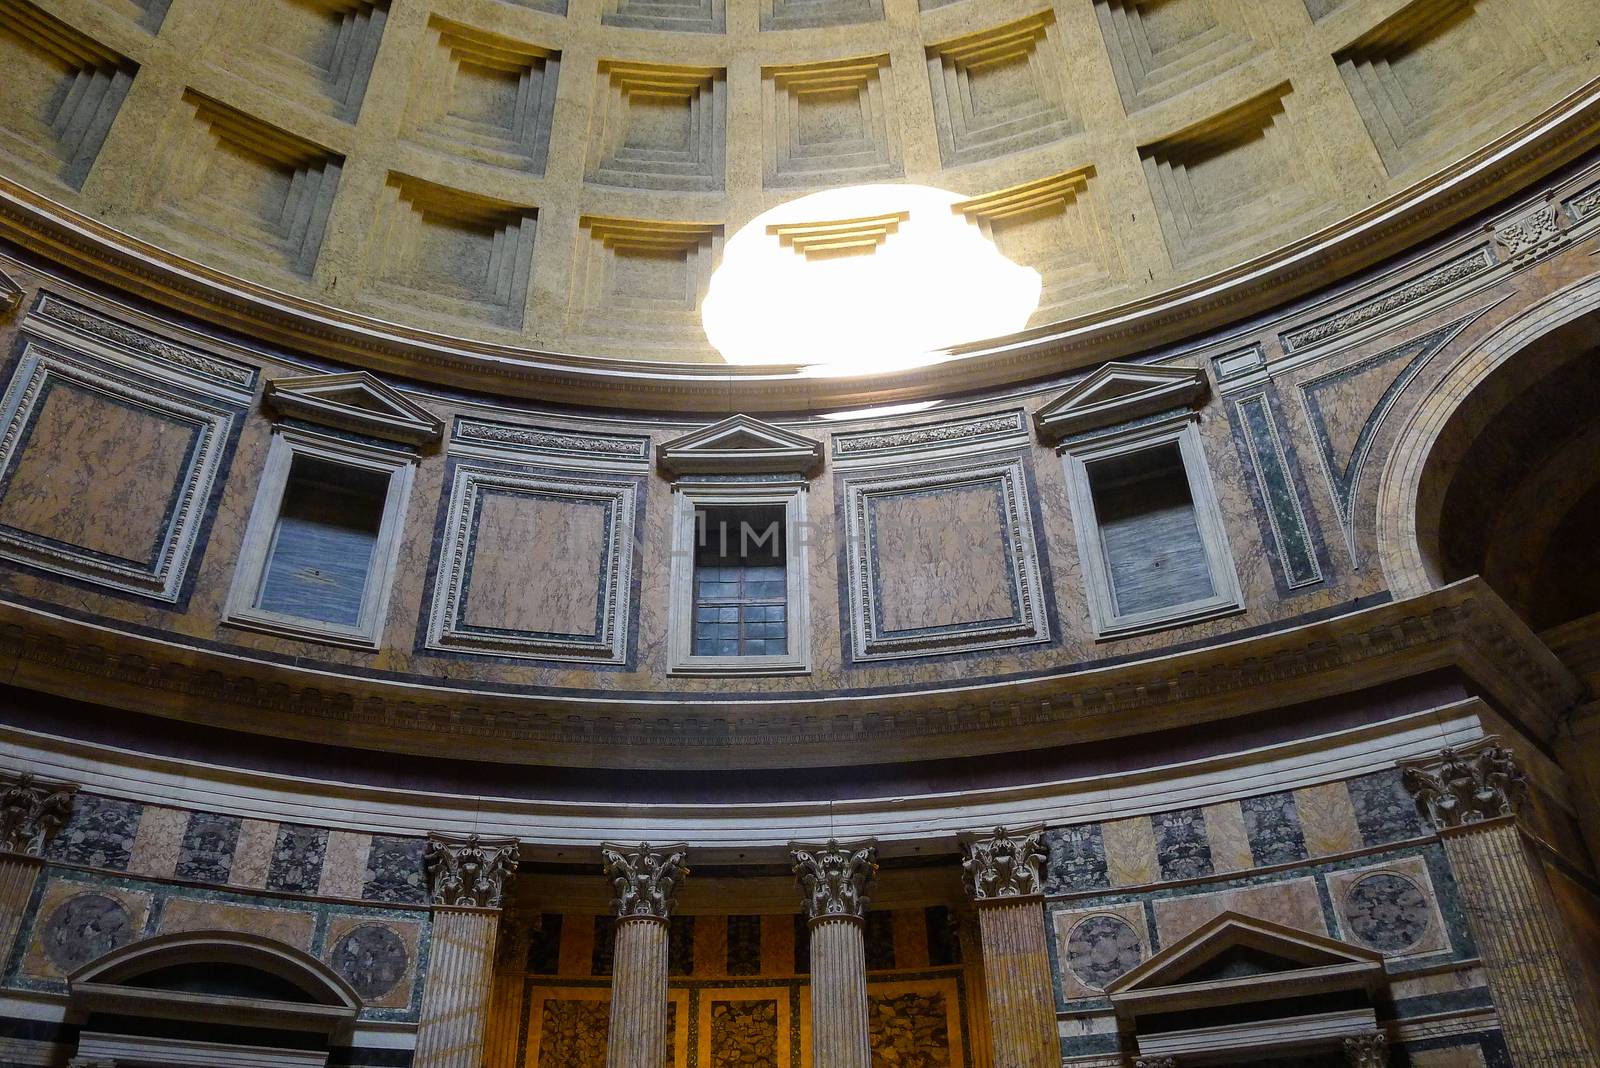 The Pantheon is a former Roman temple, now a church, in Rome, Italy, on the site of an earlier temple commissioned by Marcus Agrippa during the reign of Augustus (27 BC – 14 AD). The present building was completed by the emperor Hadrian and probably dedicated about 126 AD.